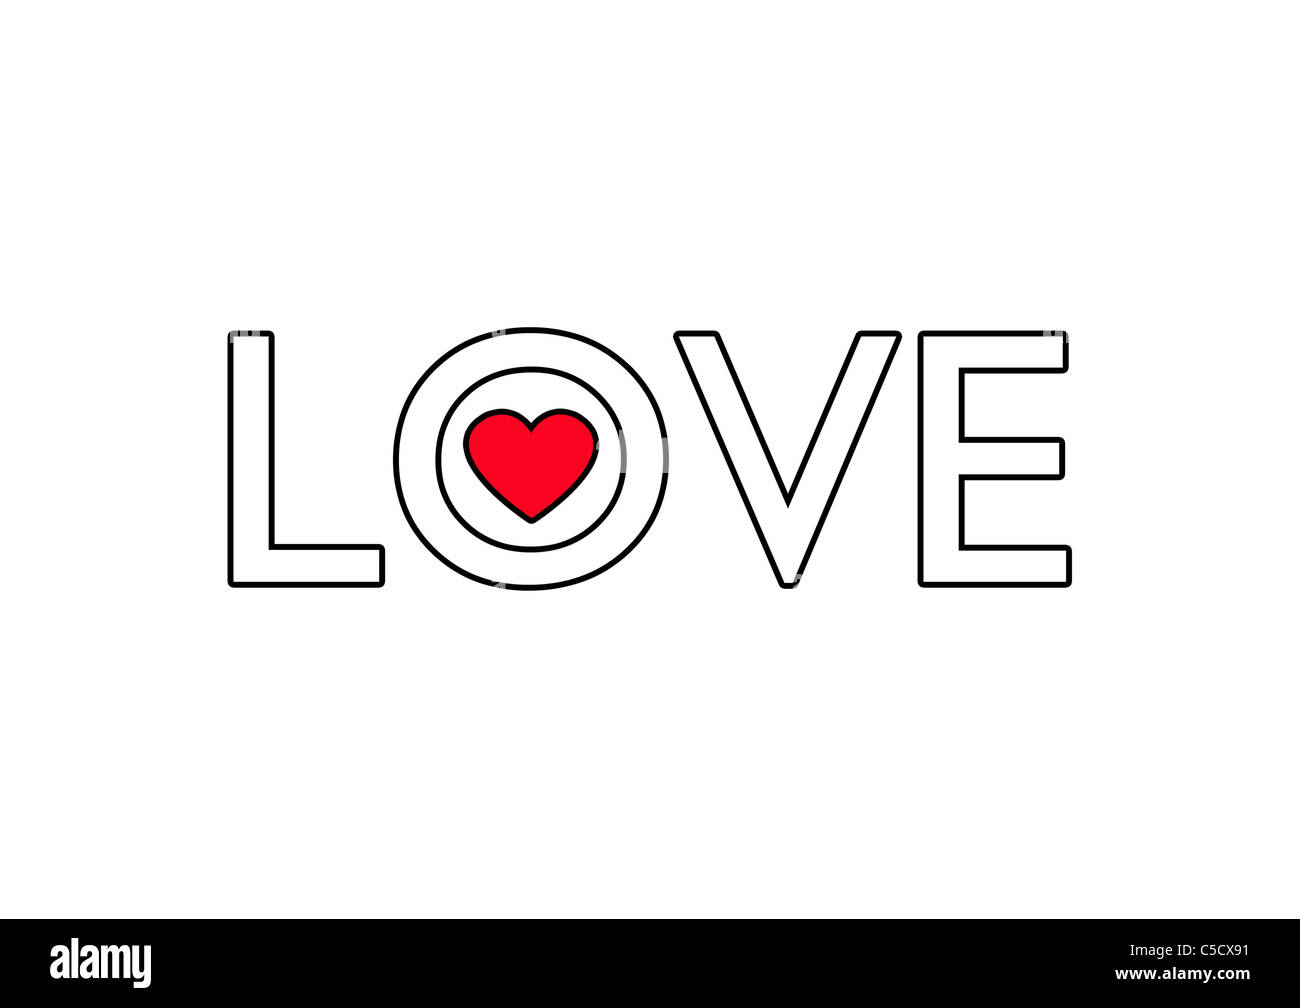 LOVE and red heart shape illustration Stock Photo